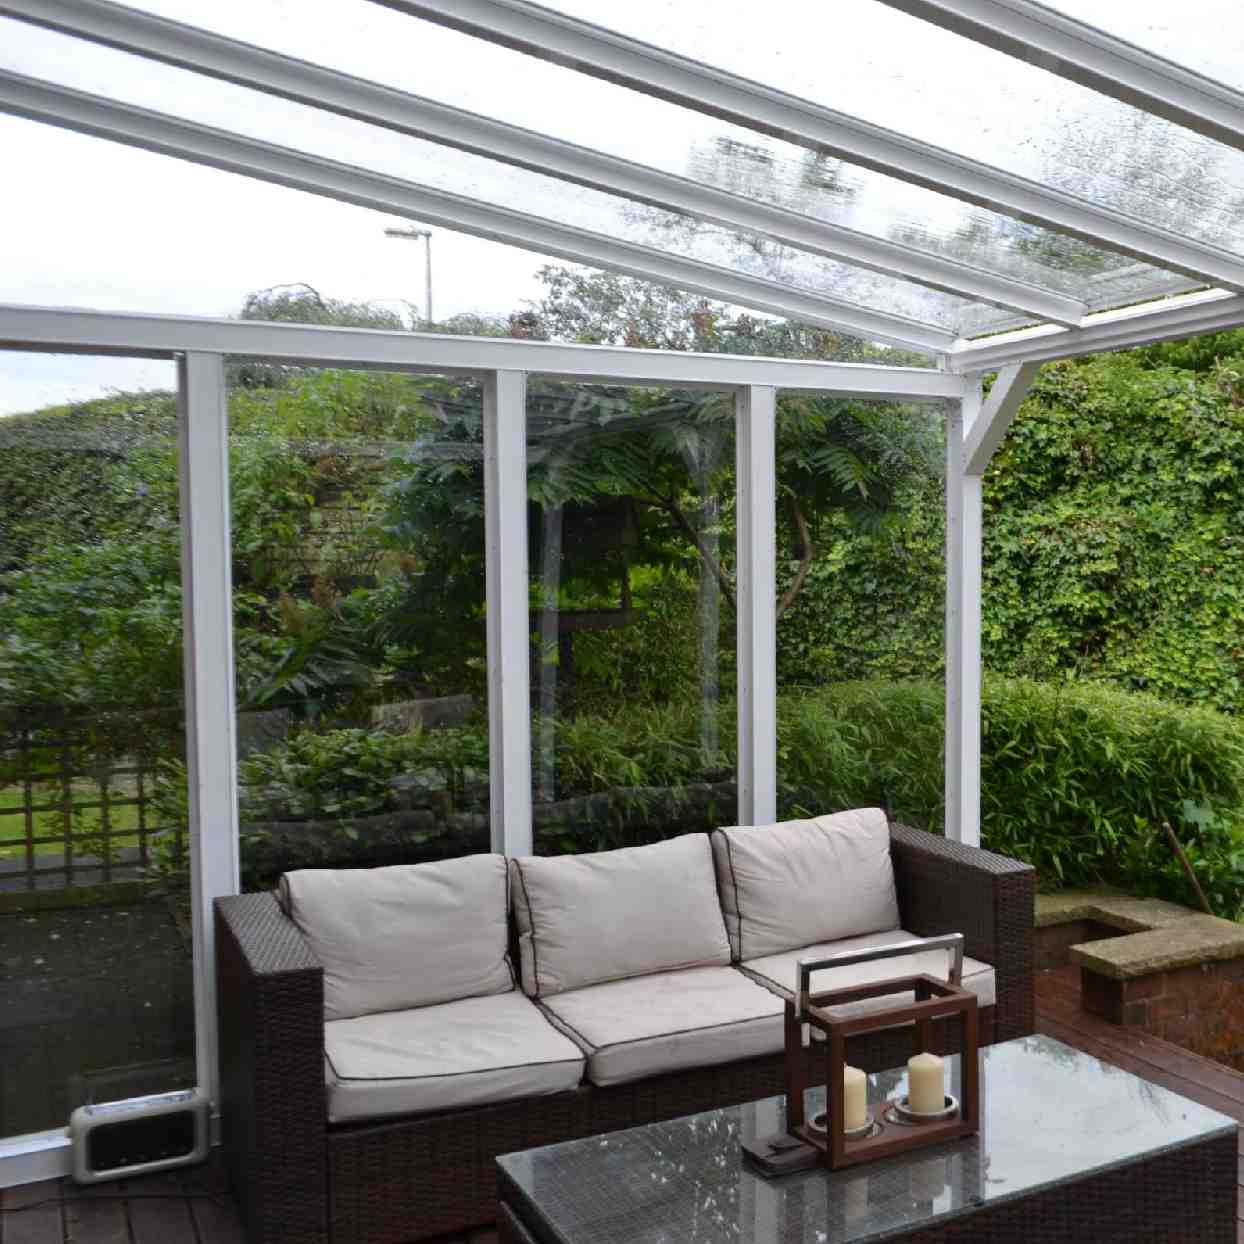 Buy Omega Verandah White with 16mm Polycarbonate Glazing - 8.4m (W) x 2.5m (P), (4) Supporting Posts online today